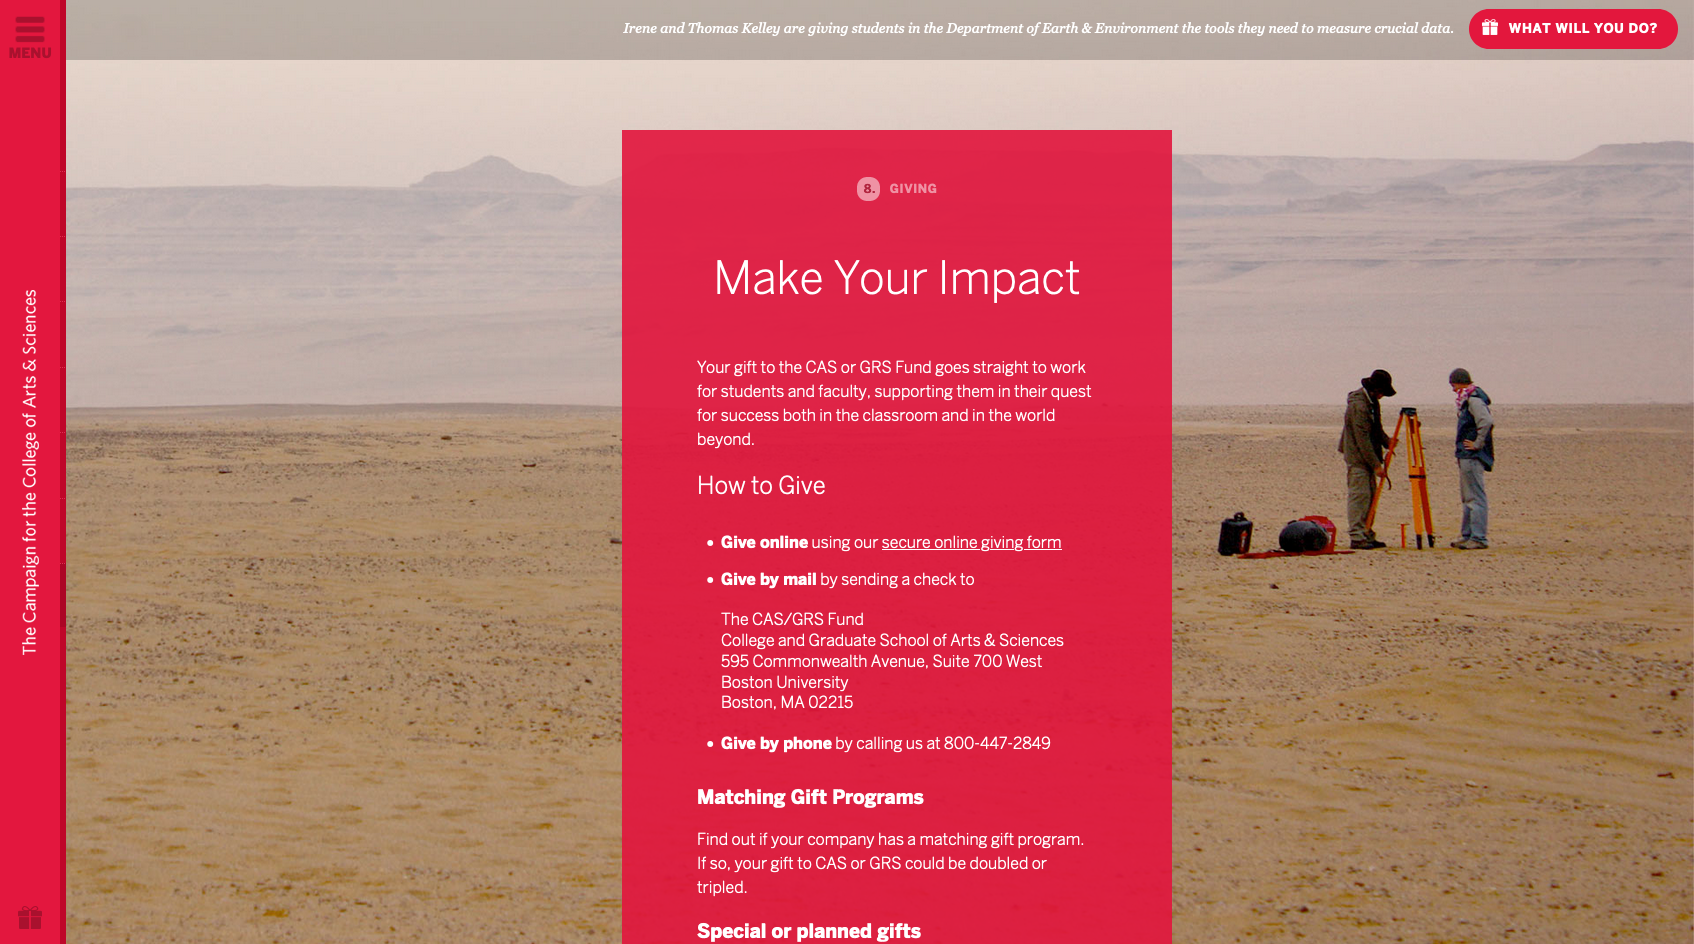 The give page. A large, red callout with information on giving draws the viewers&rsquo; eye. A photo of climate change research in an open field with mountains in the distance is in the background.